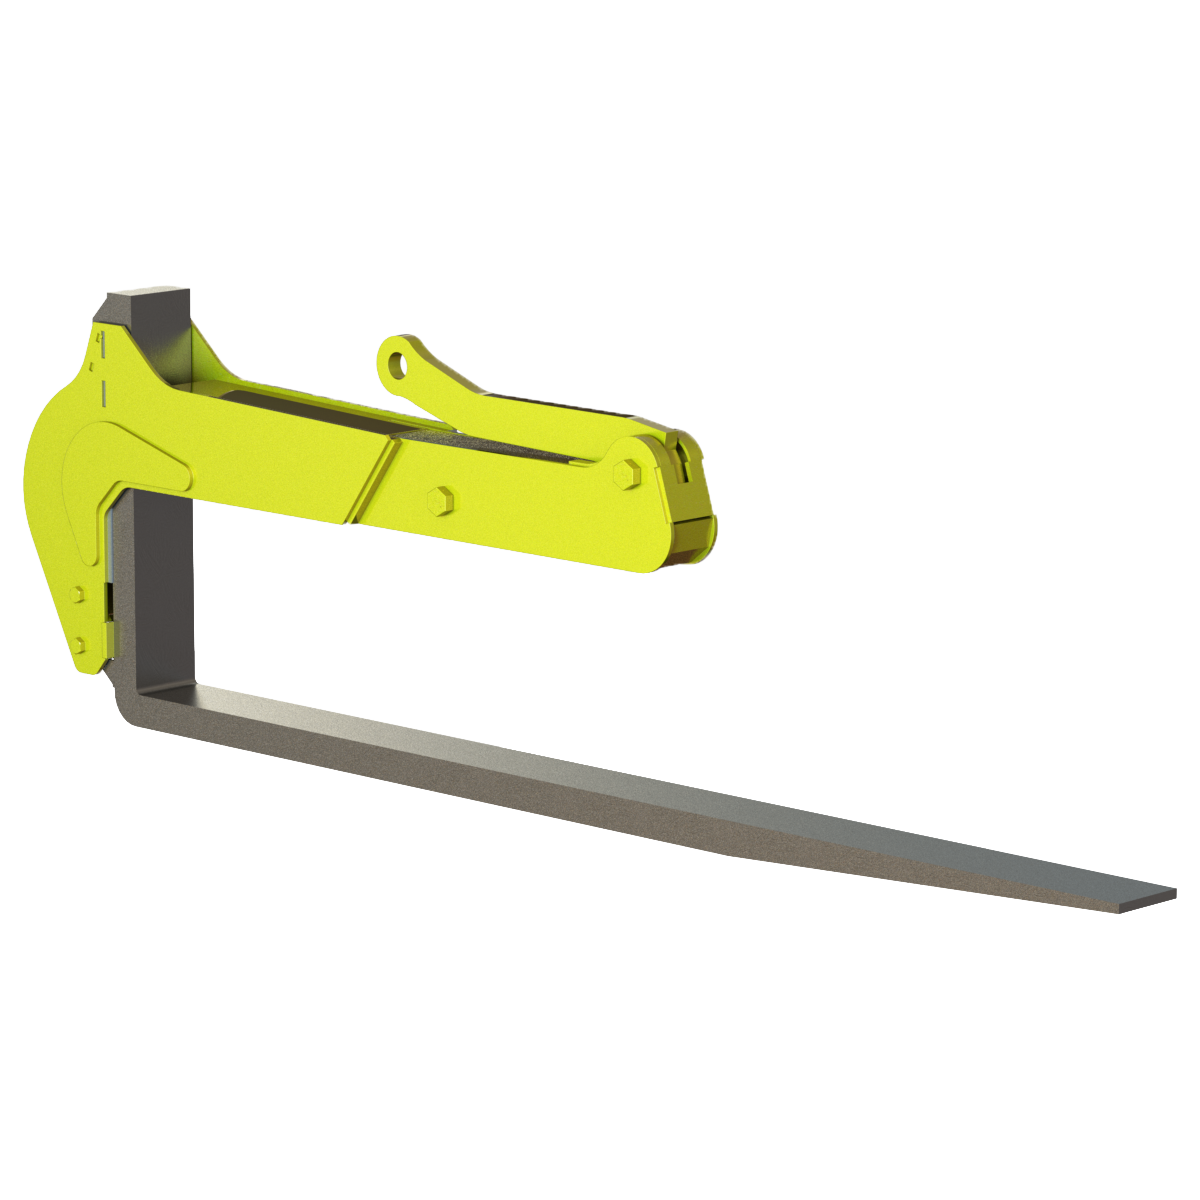 Lifting tool for large wooden slabs with short cribbing